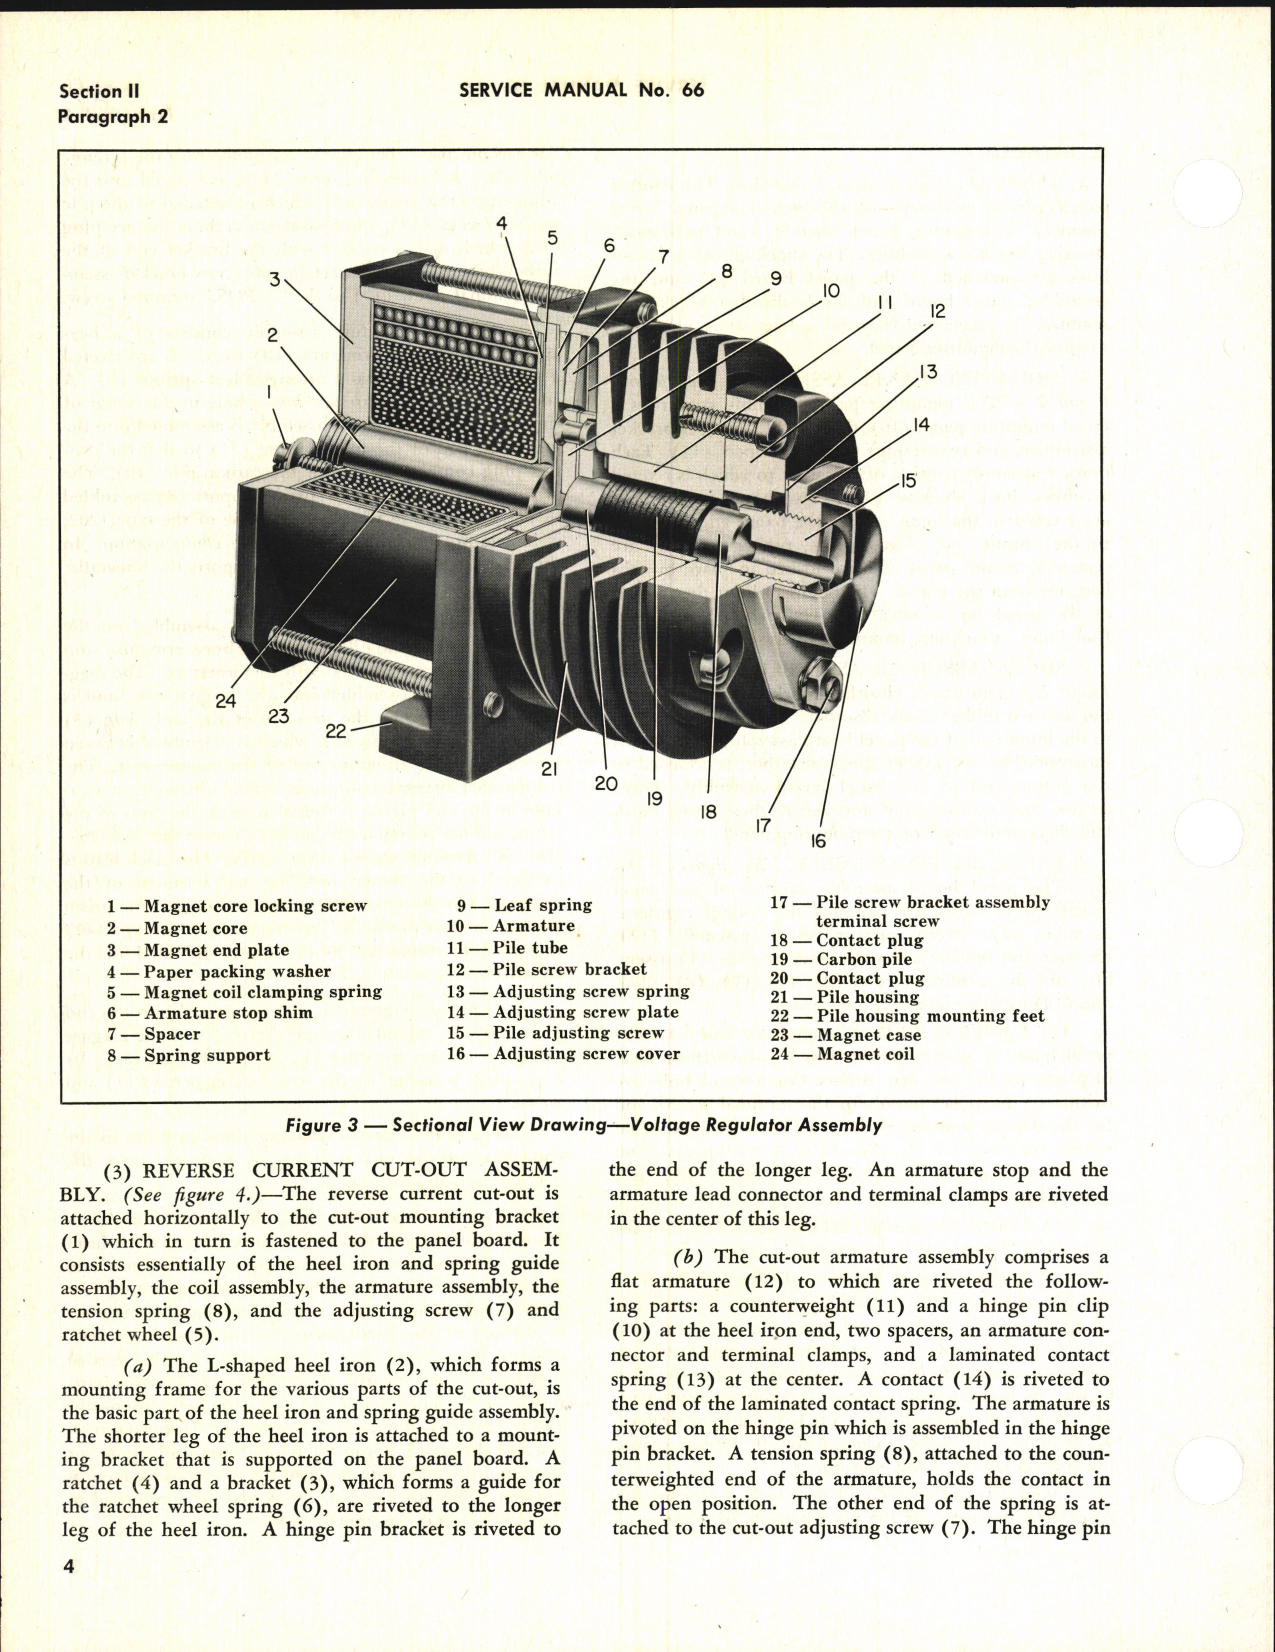 Sample page 8 from AirCorps Library document: Service Manual for D-C Generator Control Panel Type 1202 and 1427, Model 2, Style A